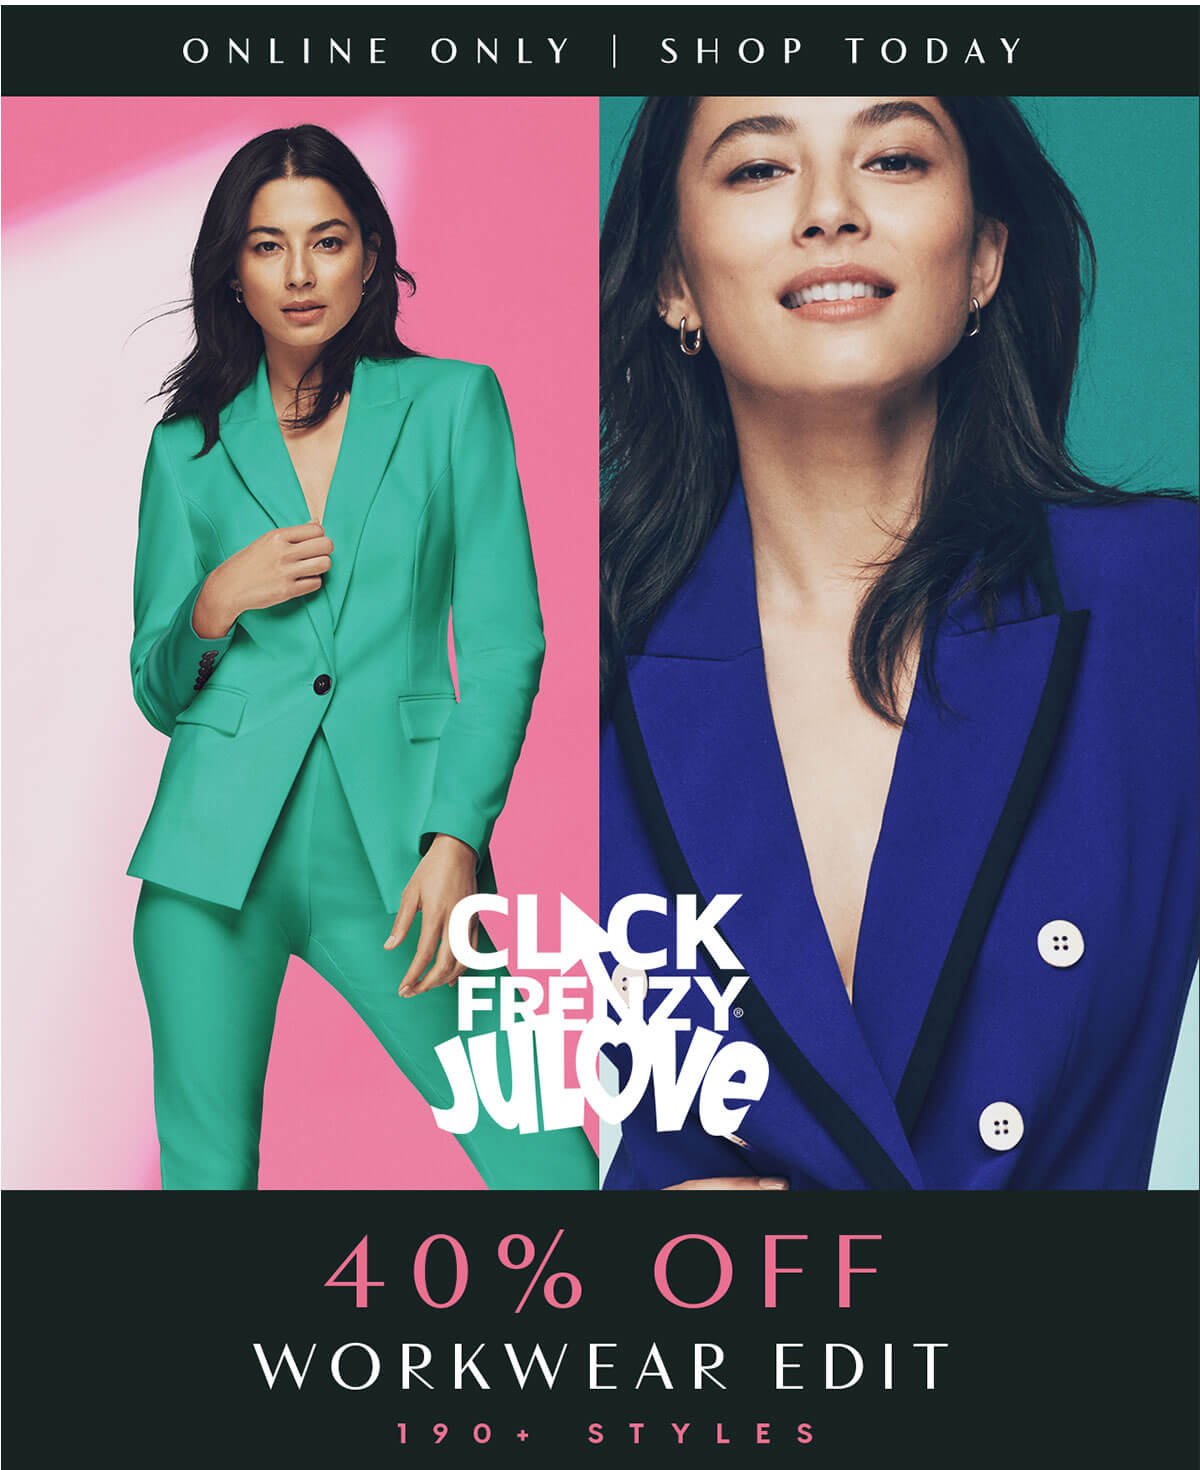 Online only shop today. Click frenzy JuLove. 40% off workwear edit